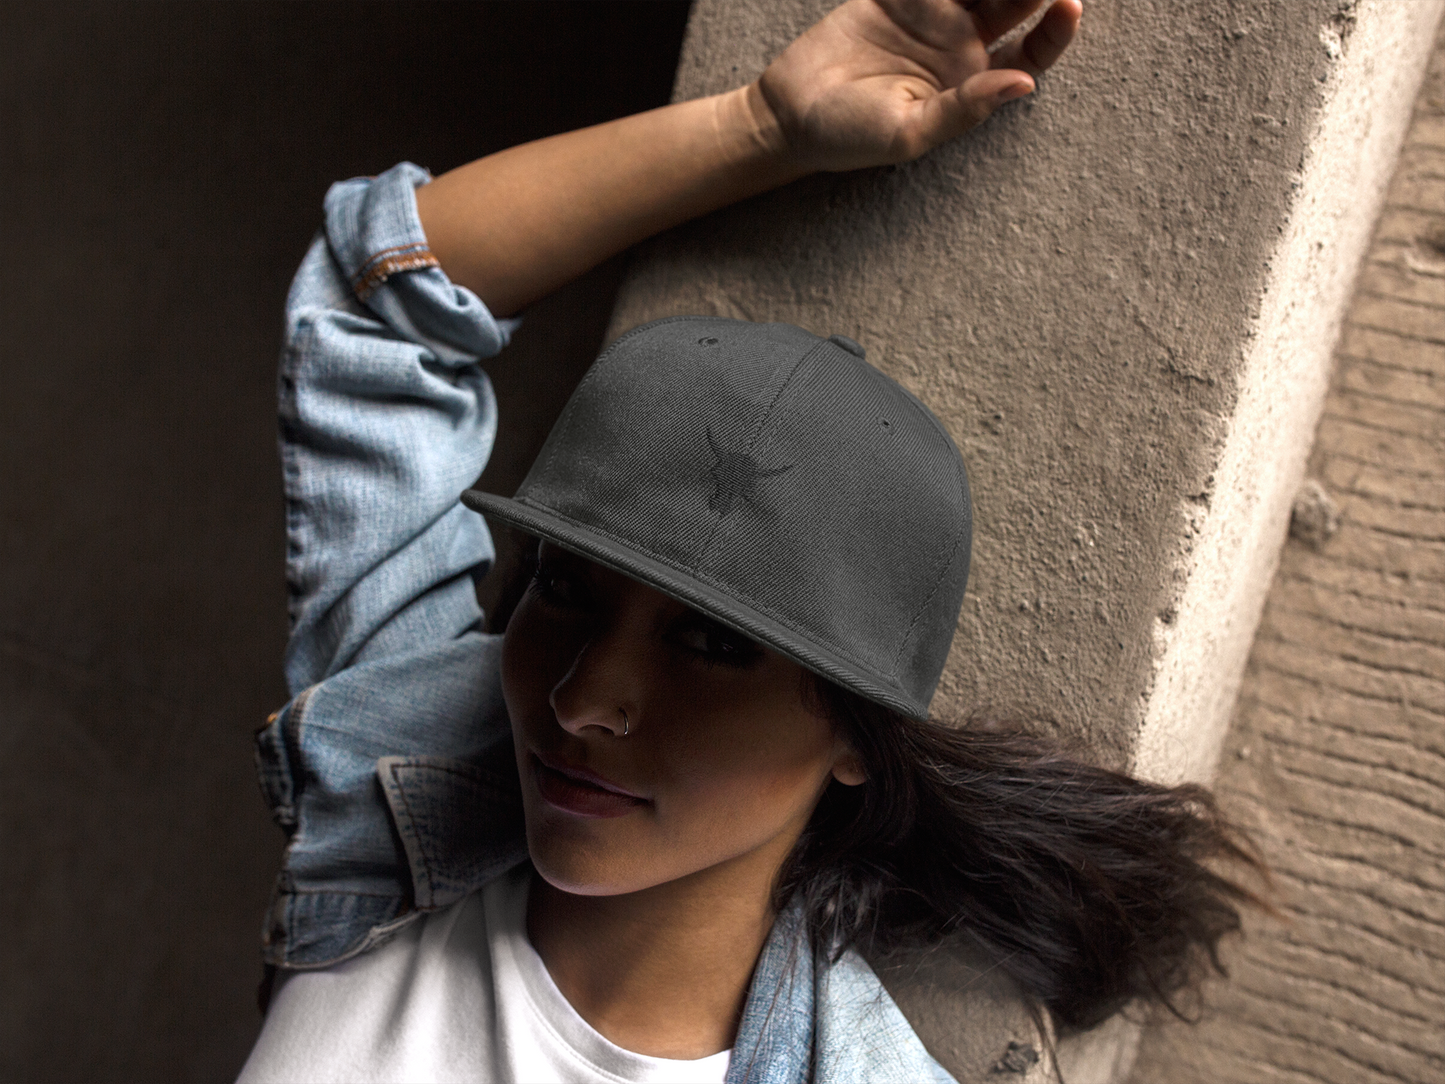 Female model with retro trucker hat leaning towards dry wall